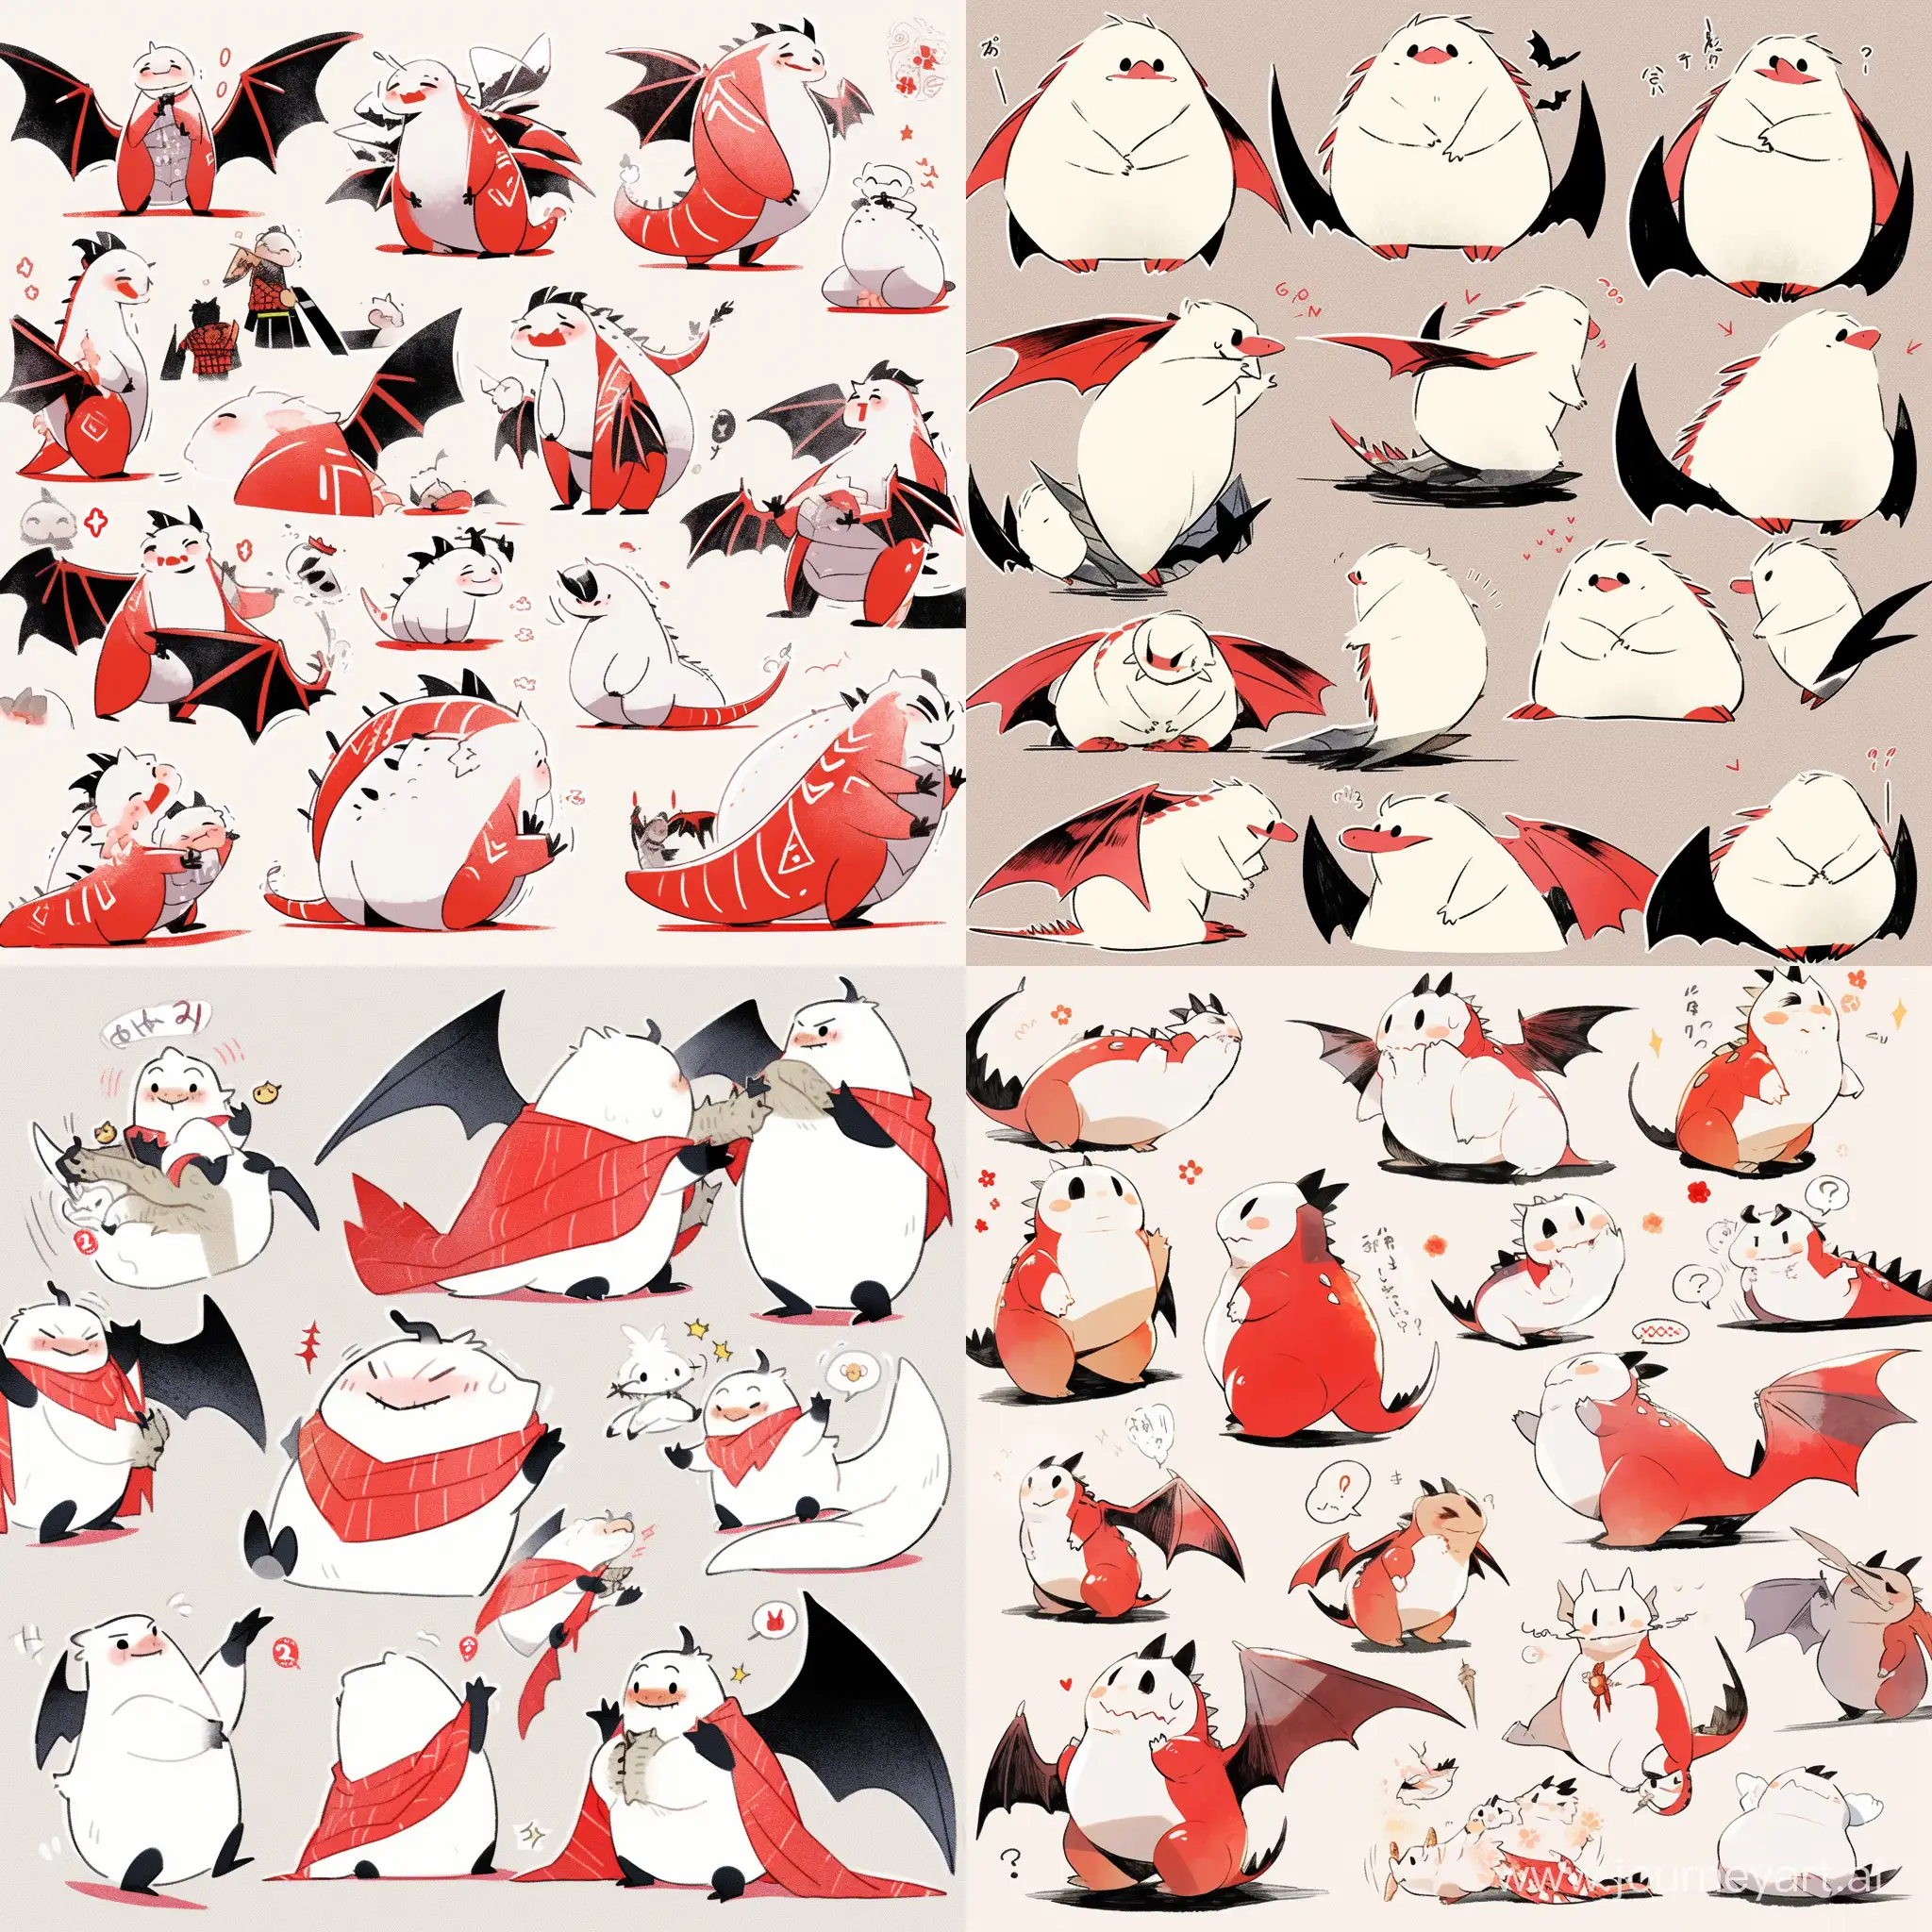 Adorable-Red-and-White-Dragon-in-Disney-Style-with-Various-Expressions